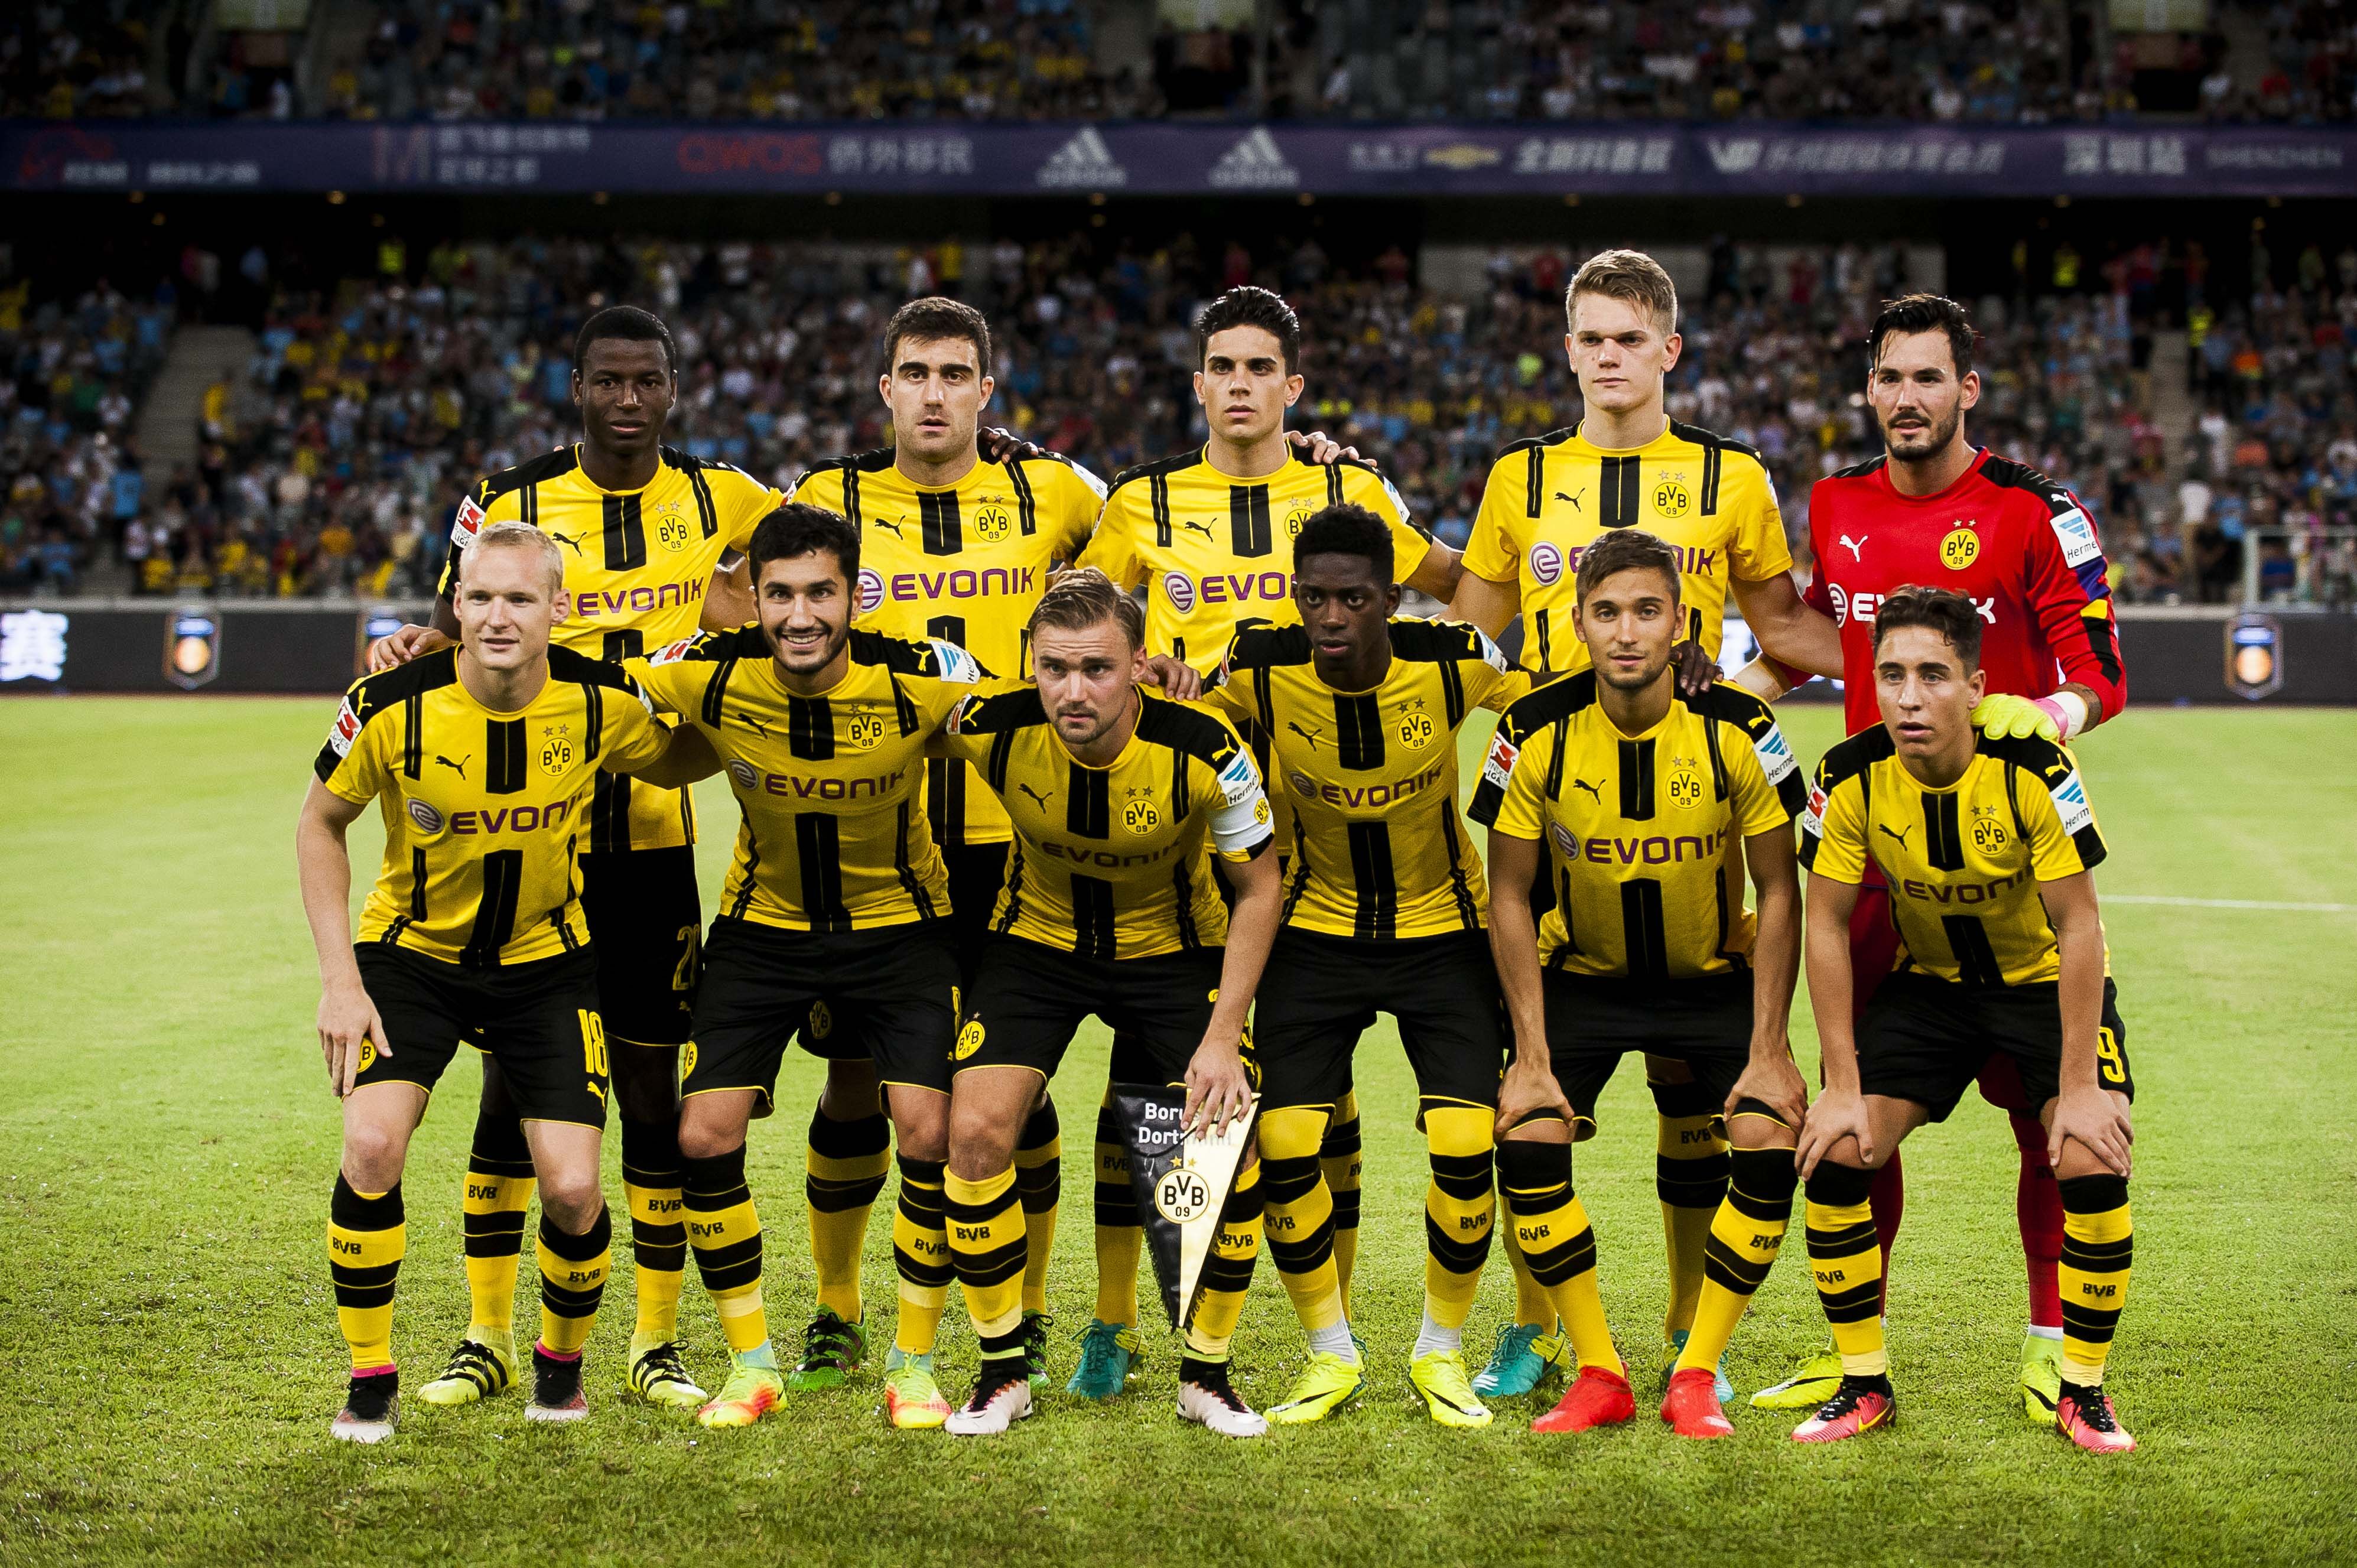  The image shows the starting lineup of Borussia Dortmund players in a soccer match, all wearing yellow jerseys and black shorts, standing in a row with determination on their faces.